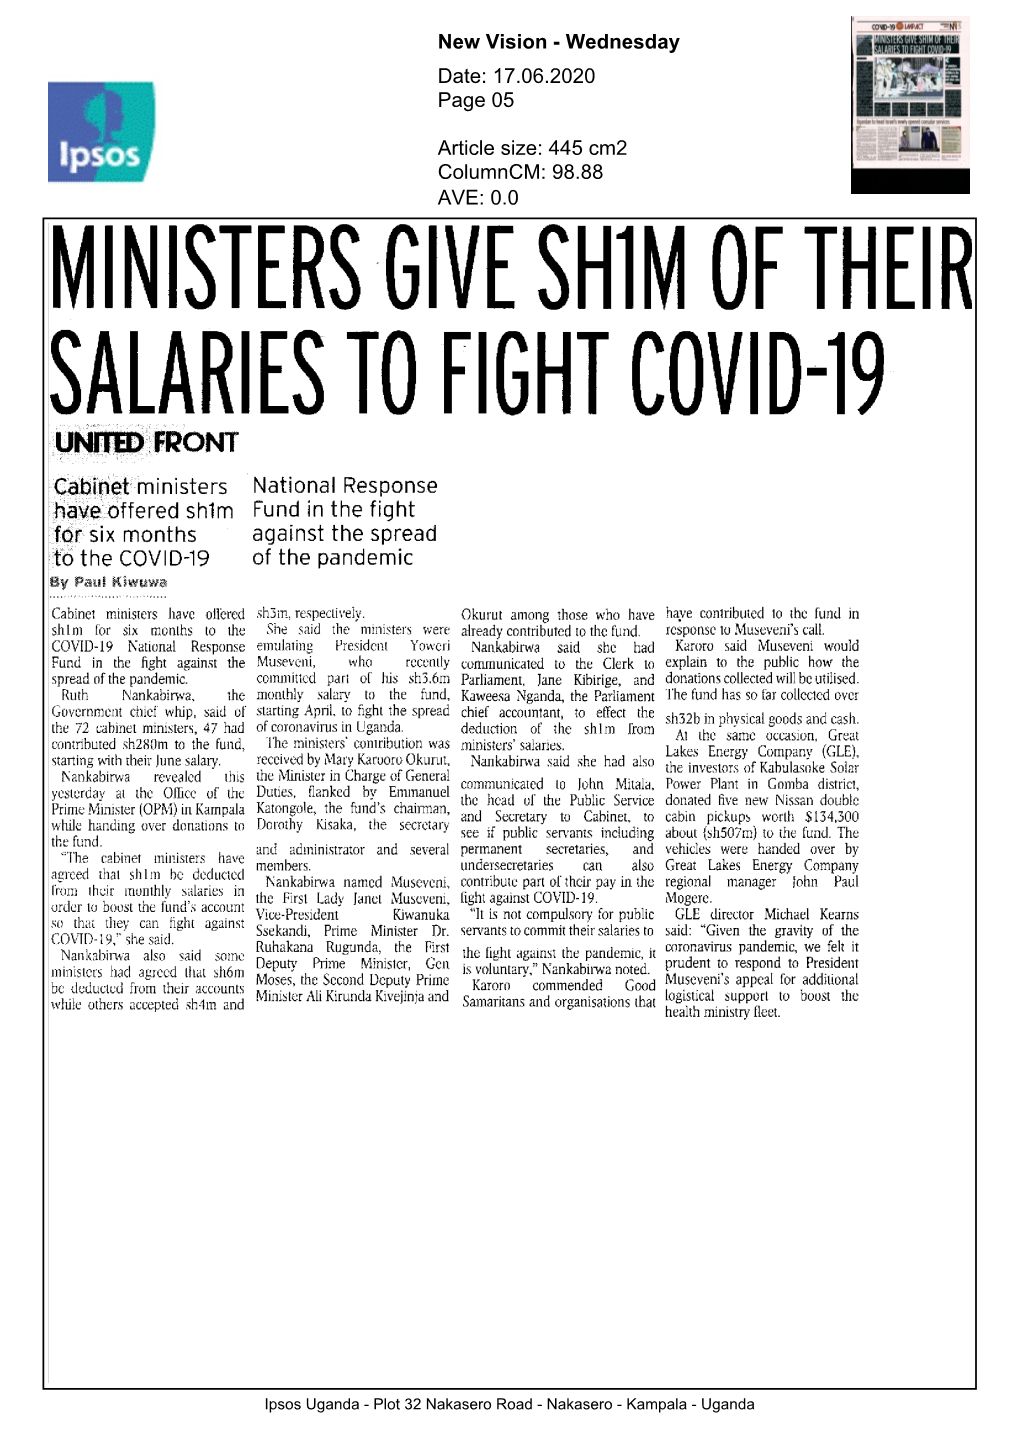 Ministers Give Shim of Their Salaries to Fight Covid19